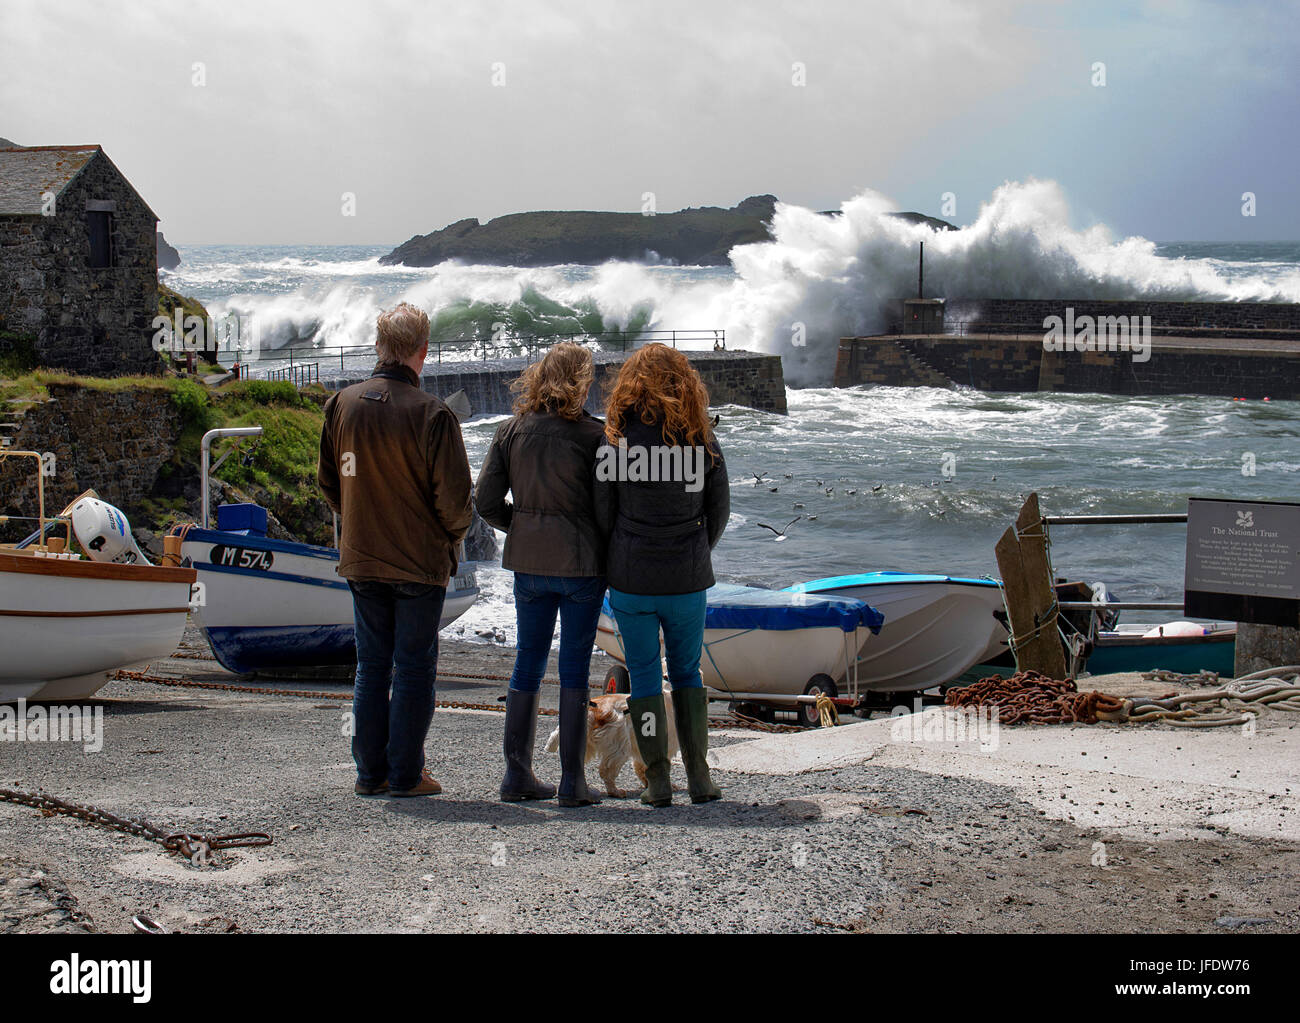 Mullion Harbour,Lizard,Cornwall, Heavy Stormy Sea,Gale Force Wind,Massive Waves,England, Stock Photo